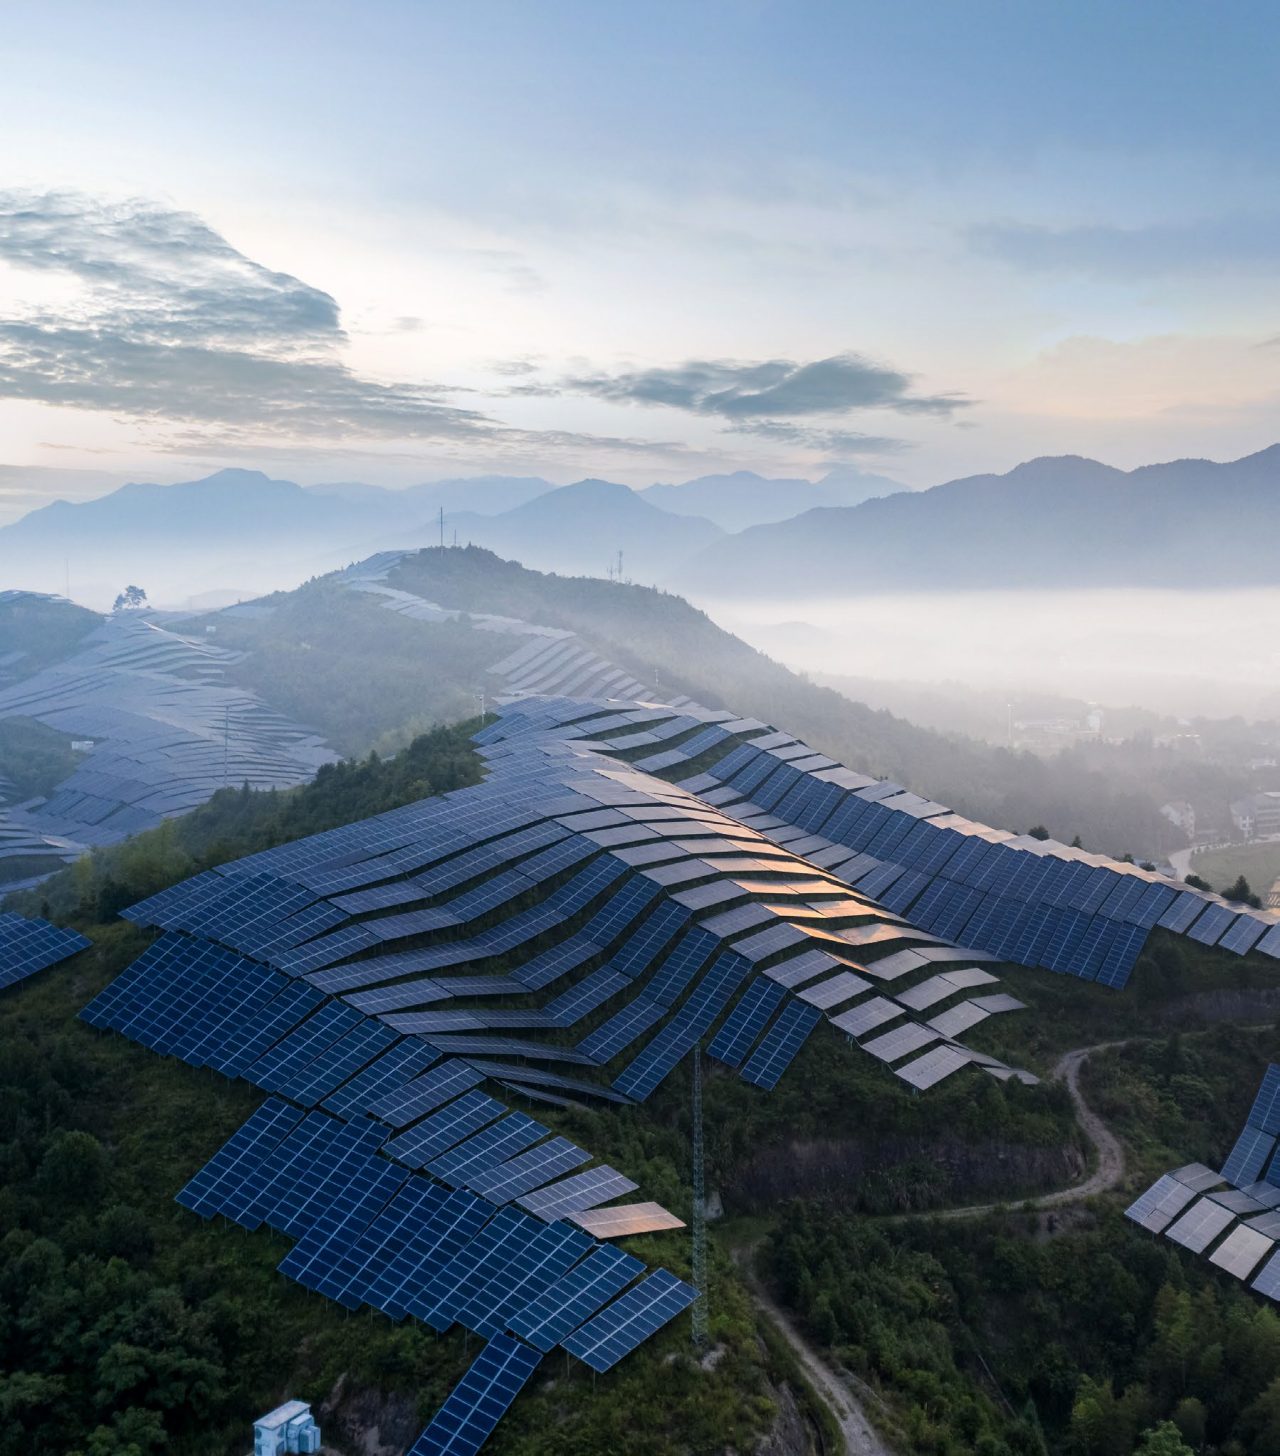 A solar power plant on the top of a mountain in the morning mist in Nanping City, Fujian Province, China.